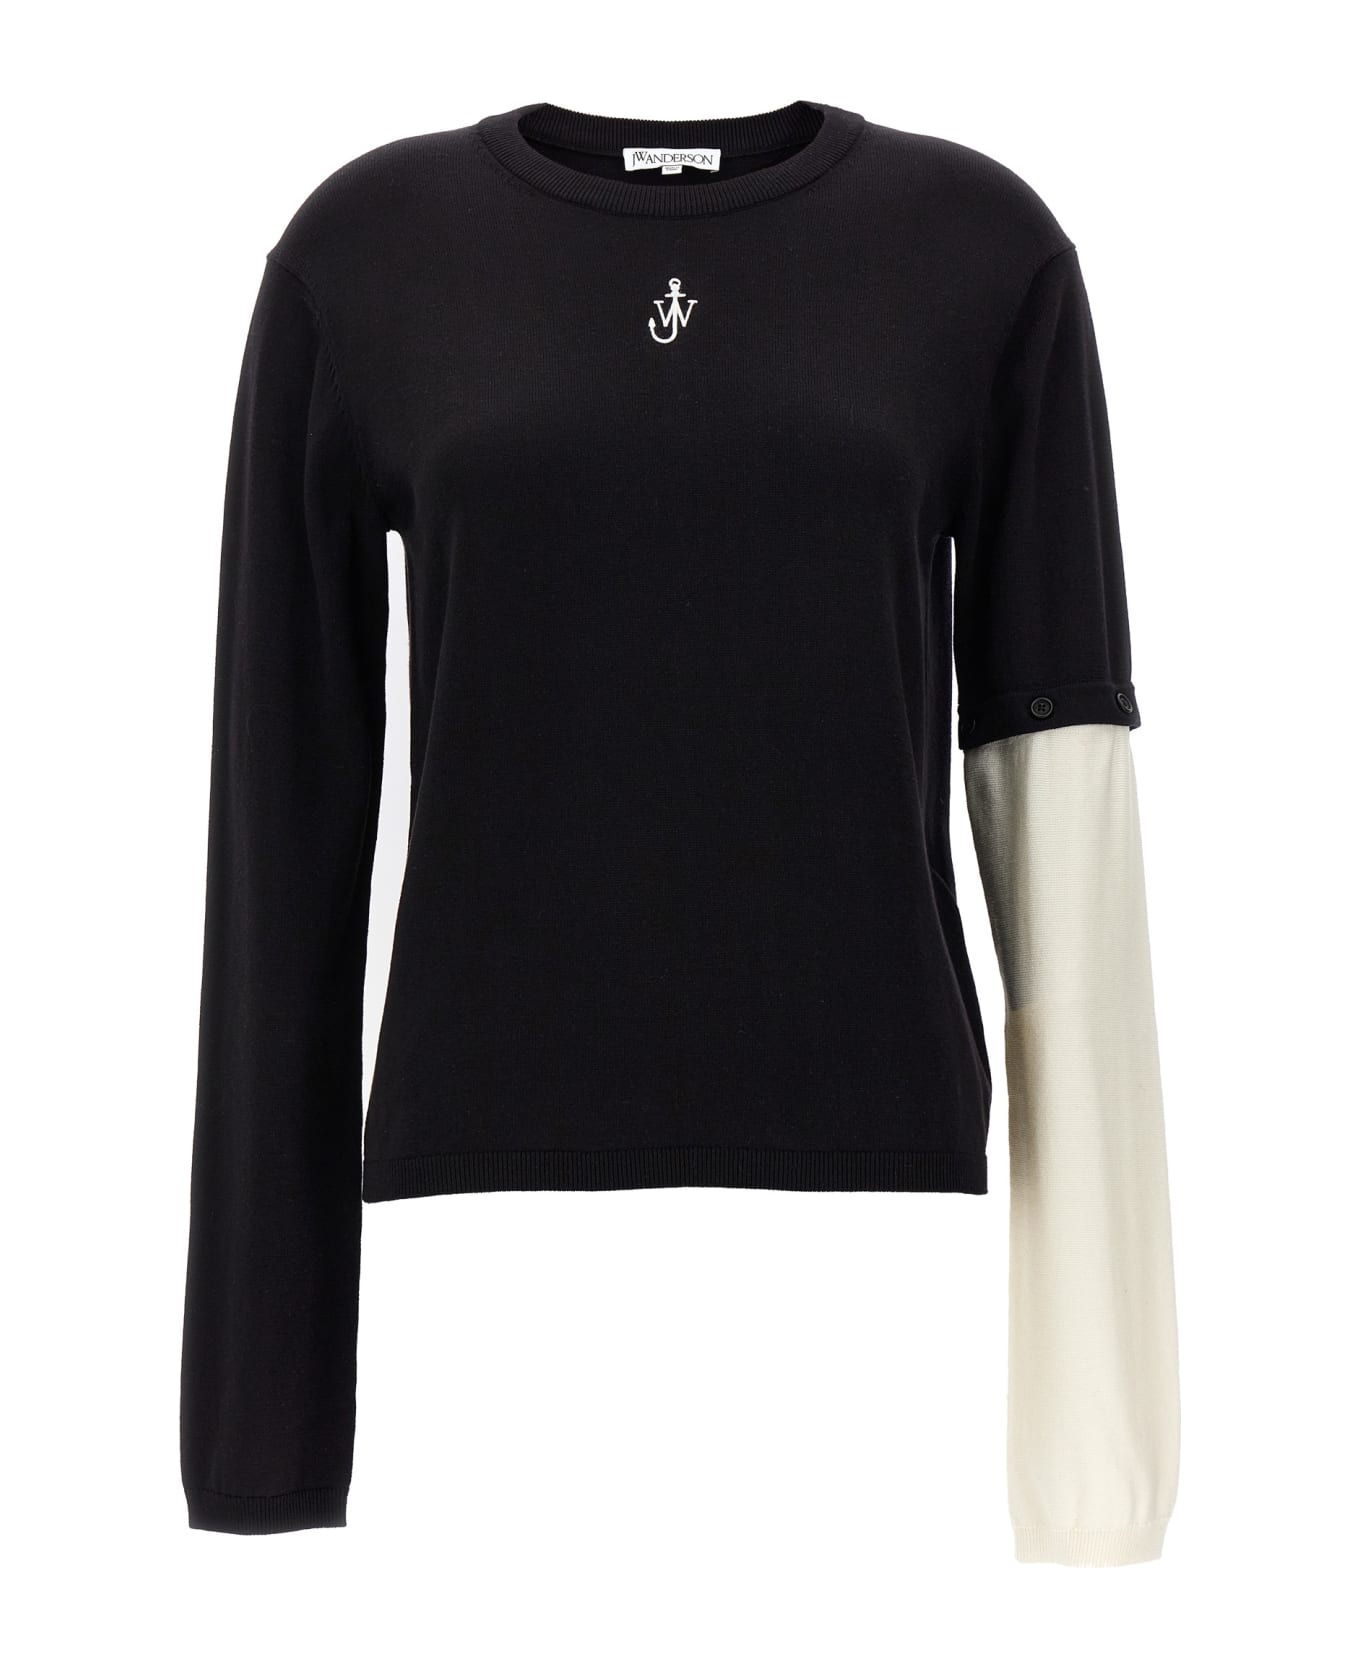 J.W. Anderson Removable Sleeve Sweater - White/Black